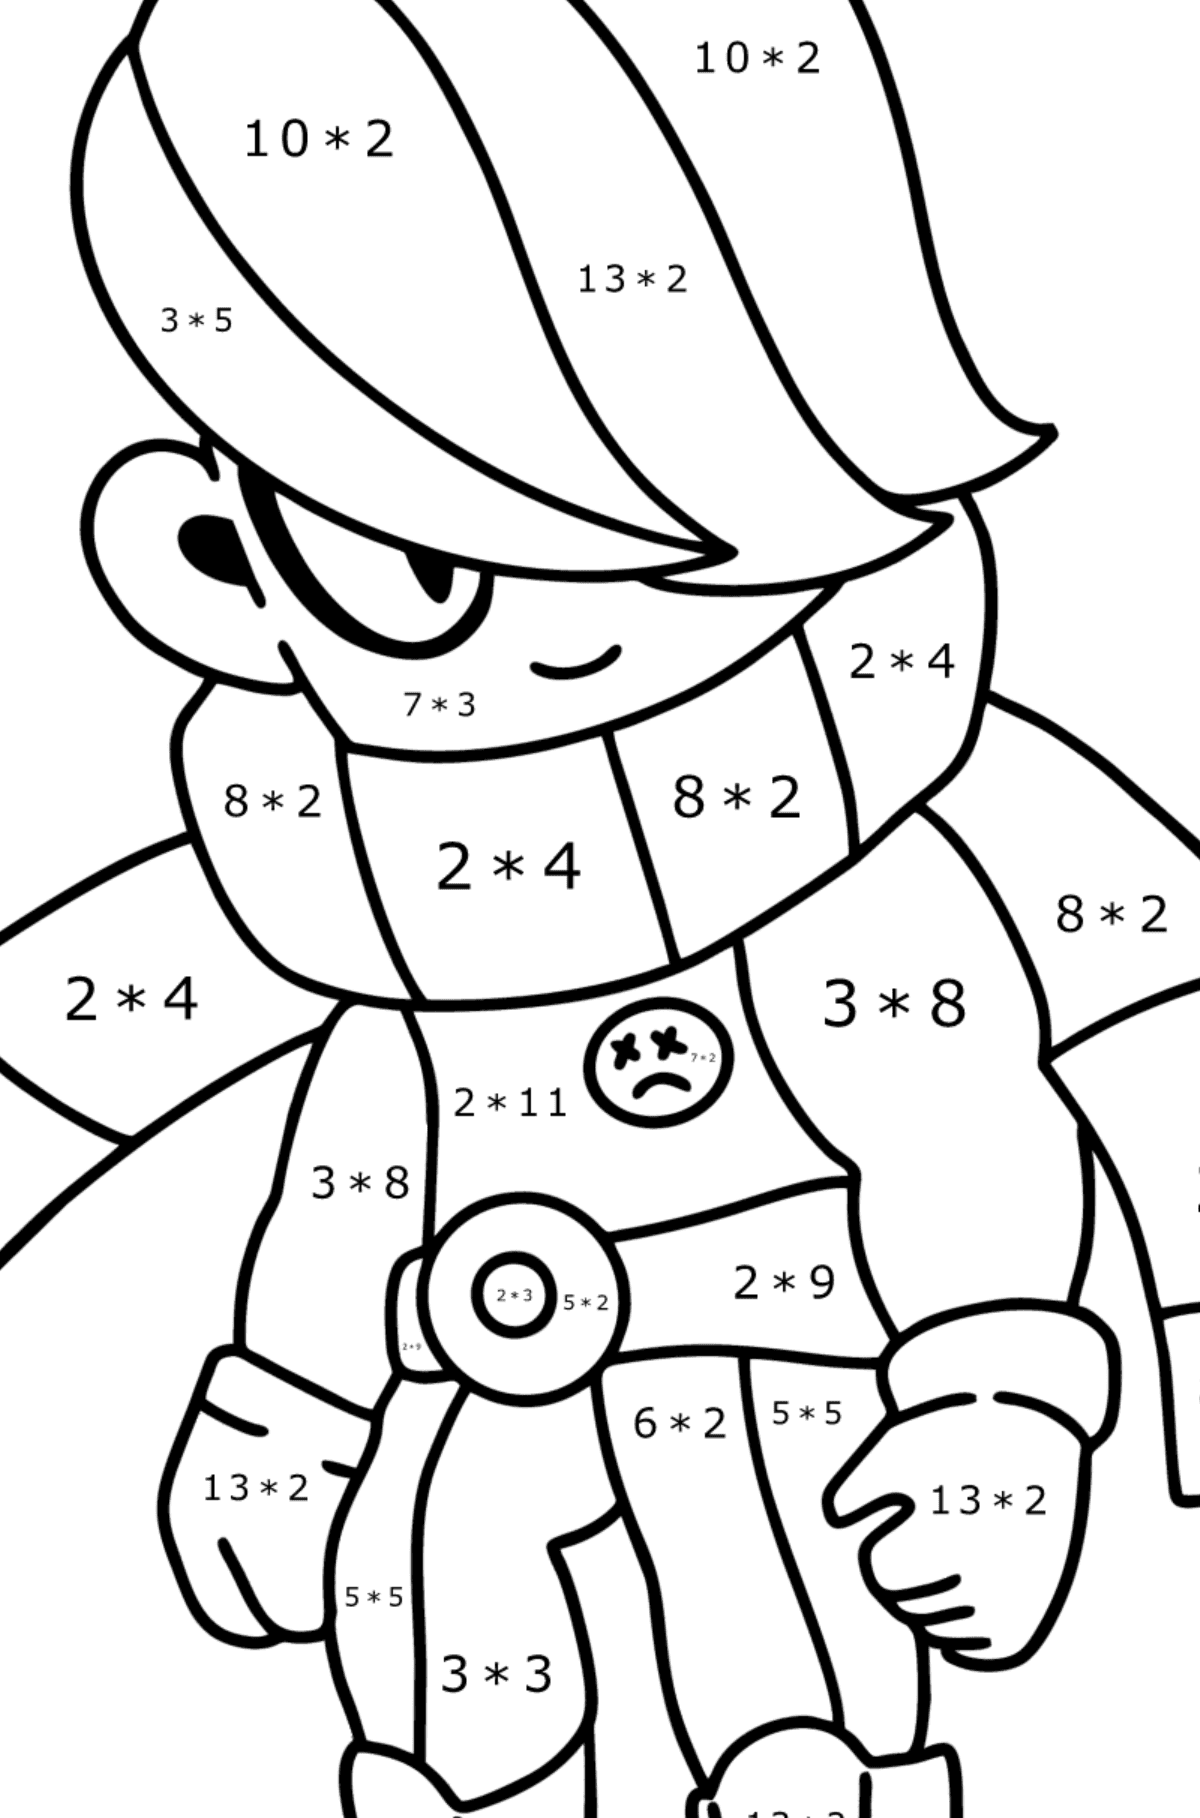 Brawl Stars Edgar coloring page - Math Coloring - Multiplication for Kids